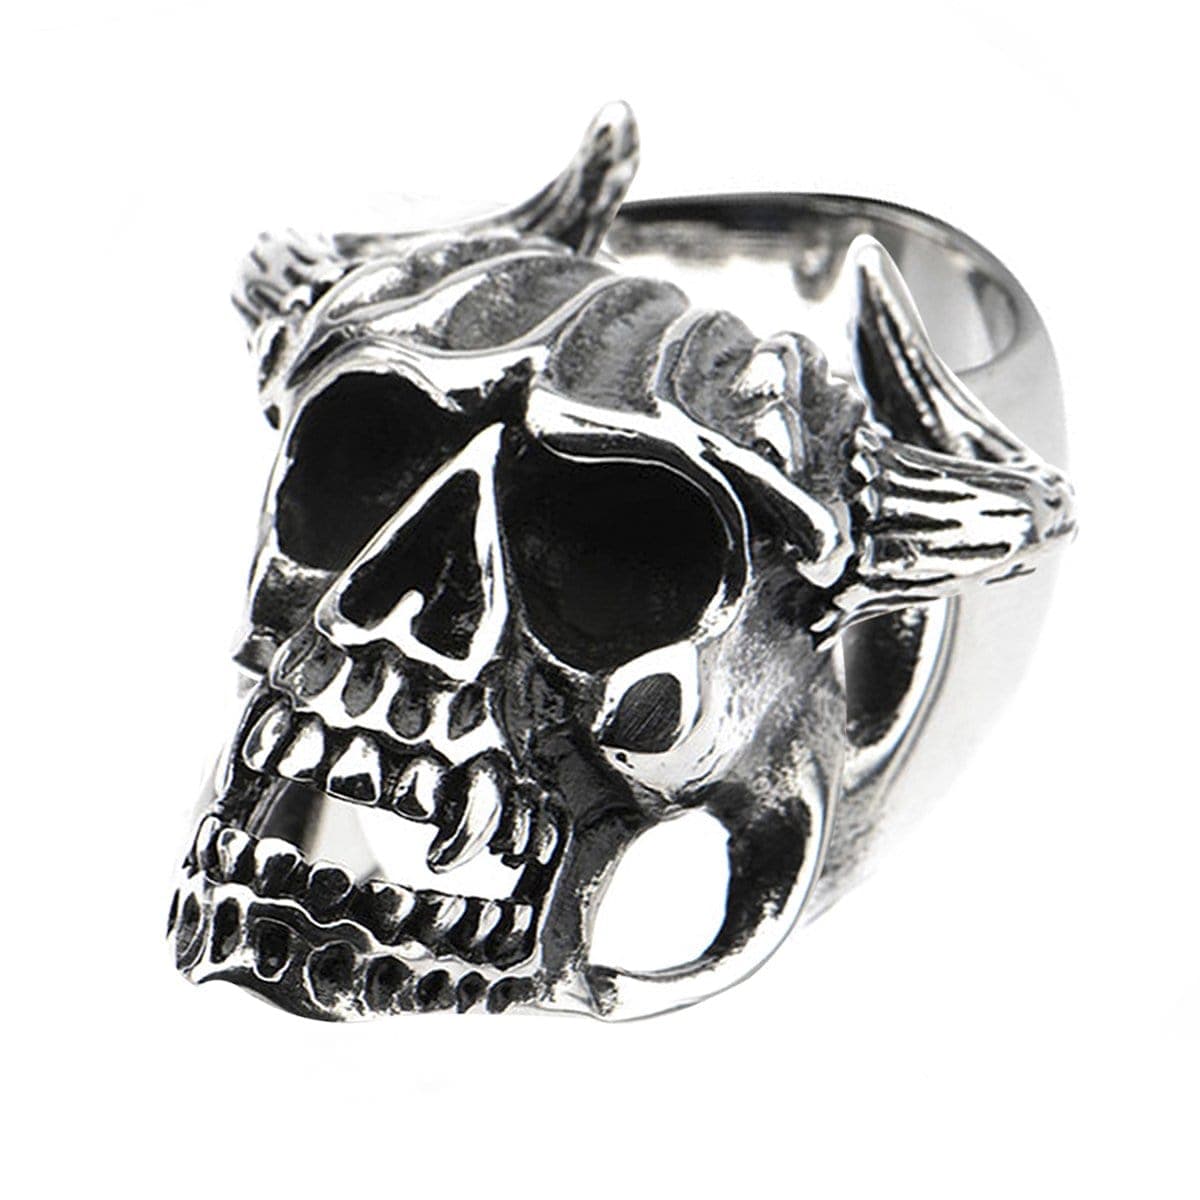 INOX JEWELRY Rings Antiqued Silver Tone Stainless Steel Oxidized Skull with Horns Ring